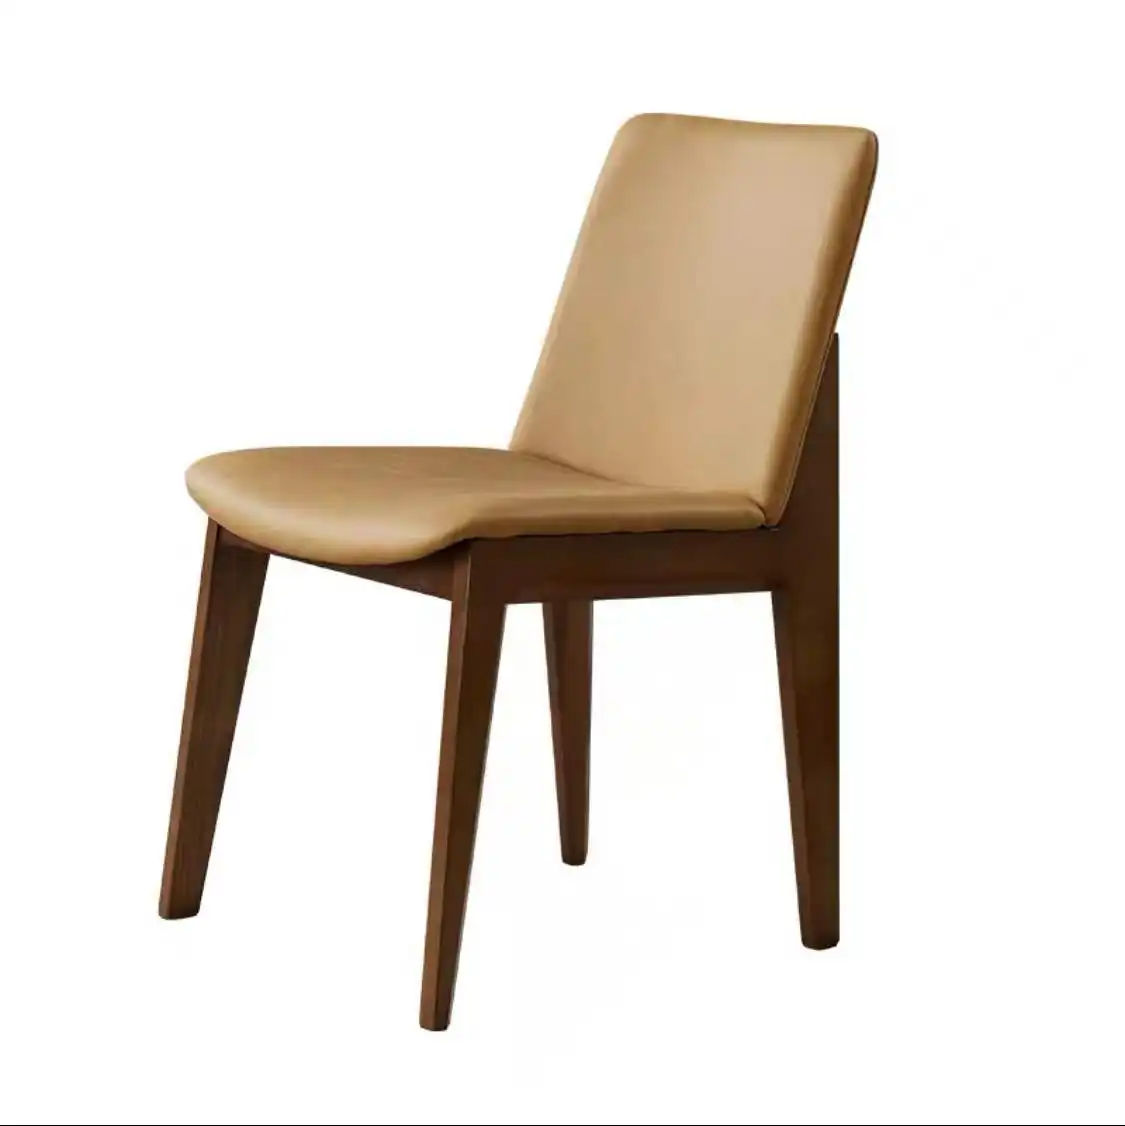 Modern Fashion Solid Wood Dining Chair Senior Care Cruise Restaurant Furniture Fabric Chairs Upholstery for Hotel Dinig Chair